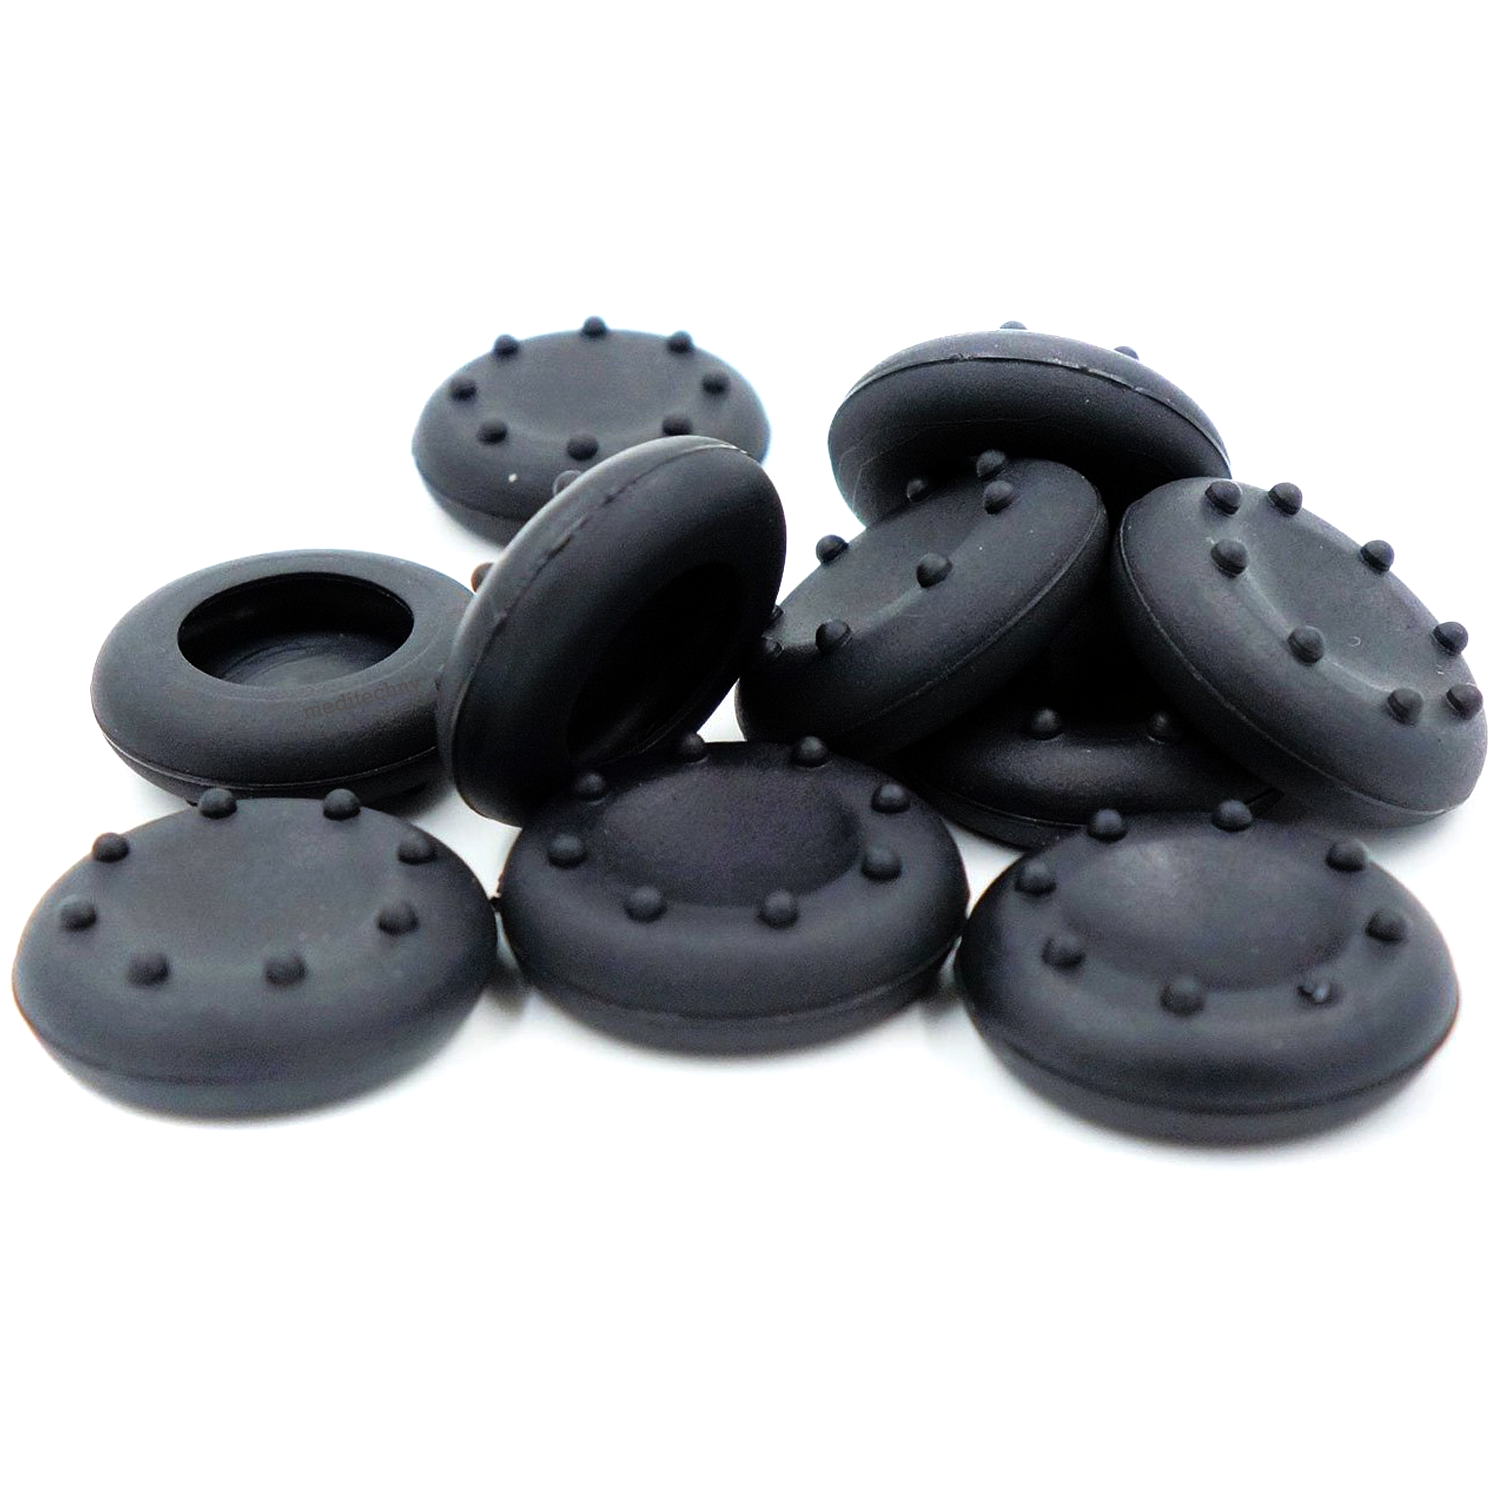 10x Black Thumbstick Grips Cap Cover Thumb Stick Grip for Xbox 360 PS3 PS4 Wii Unbranded/Generic PS4 PS3